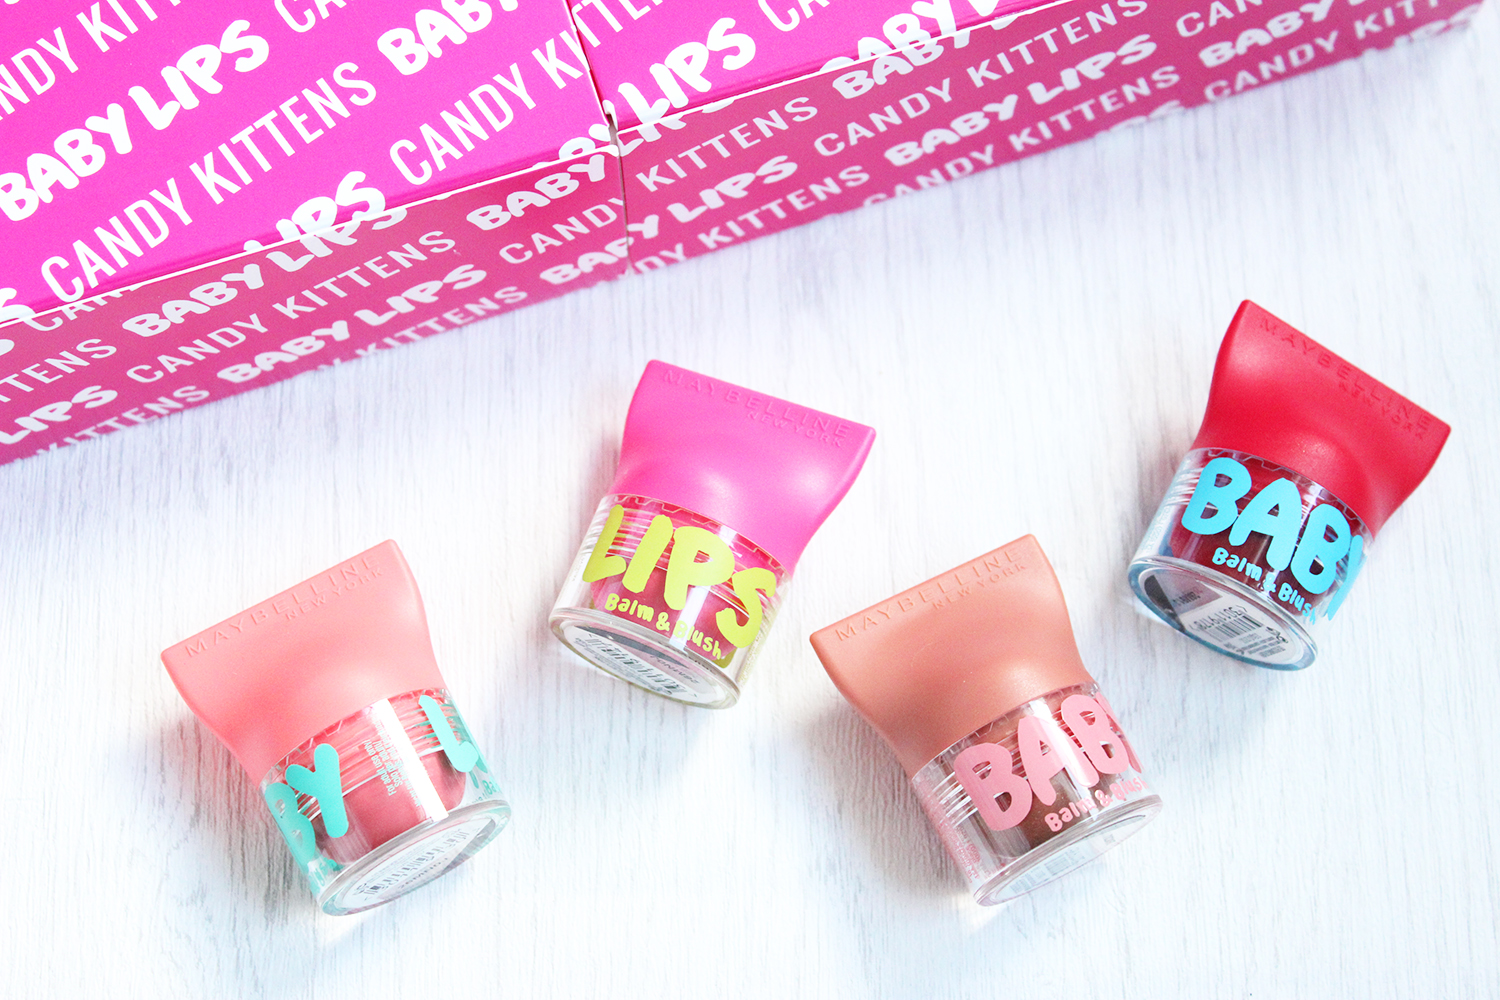 Maybelline Baby Lips Balm & Blush review